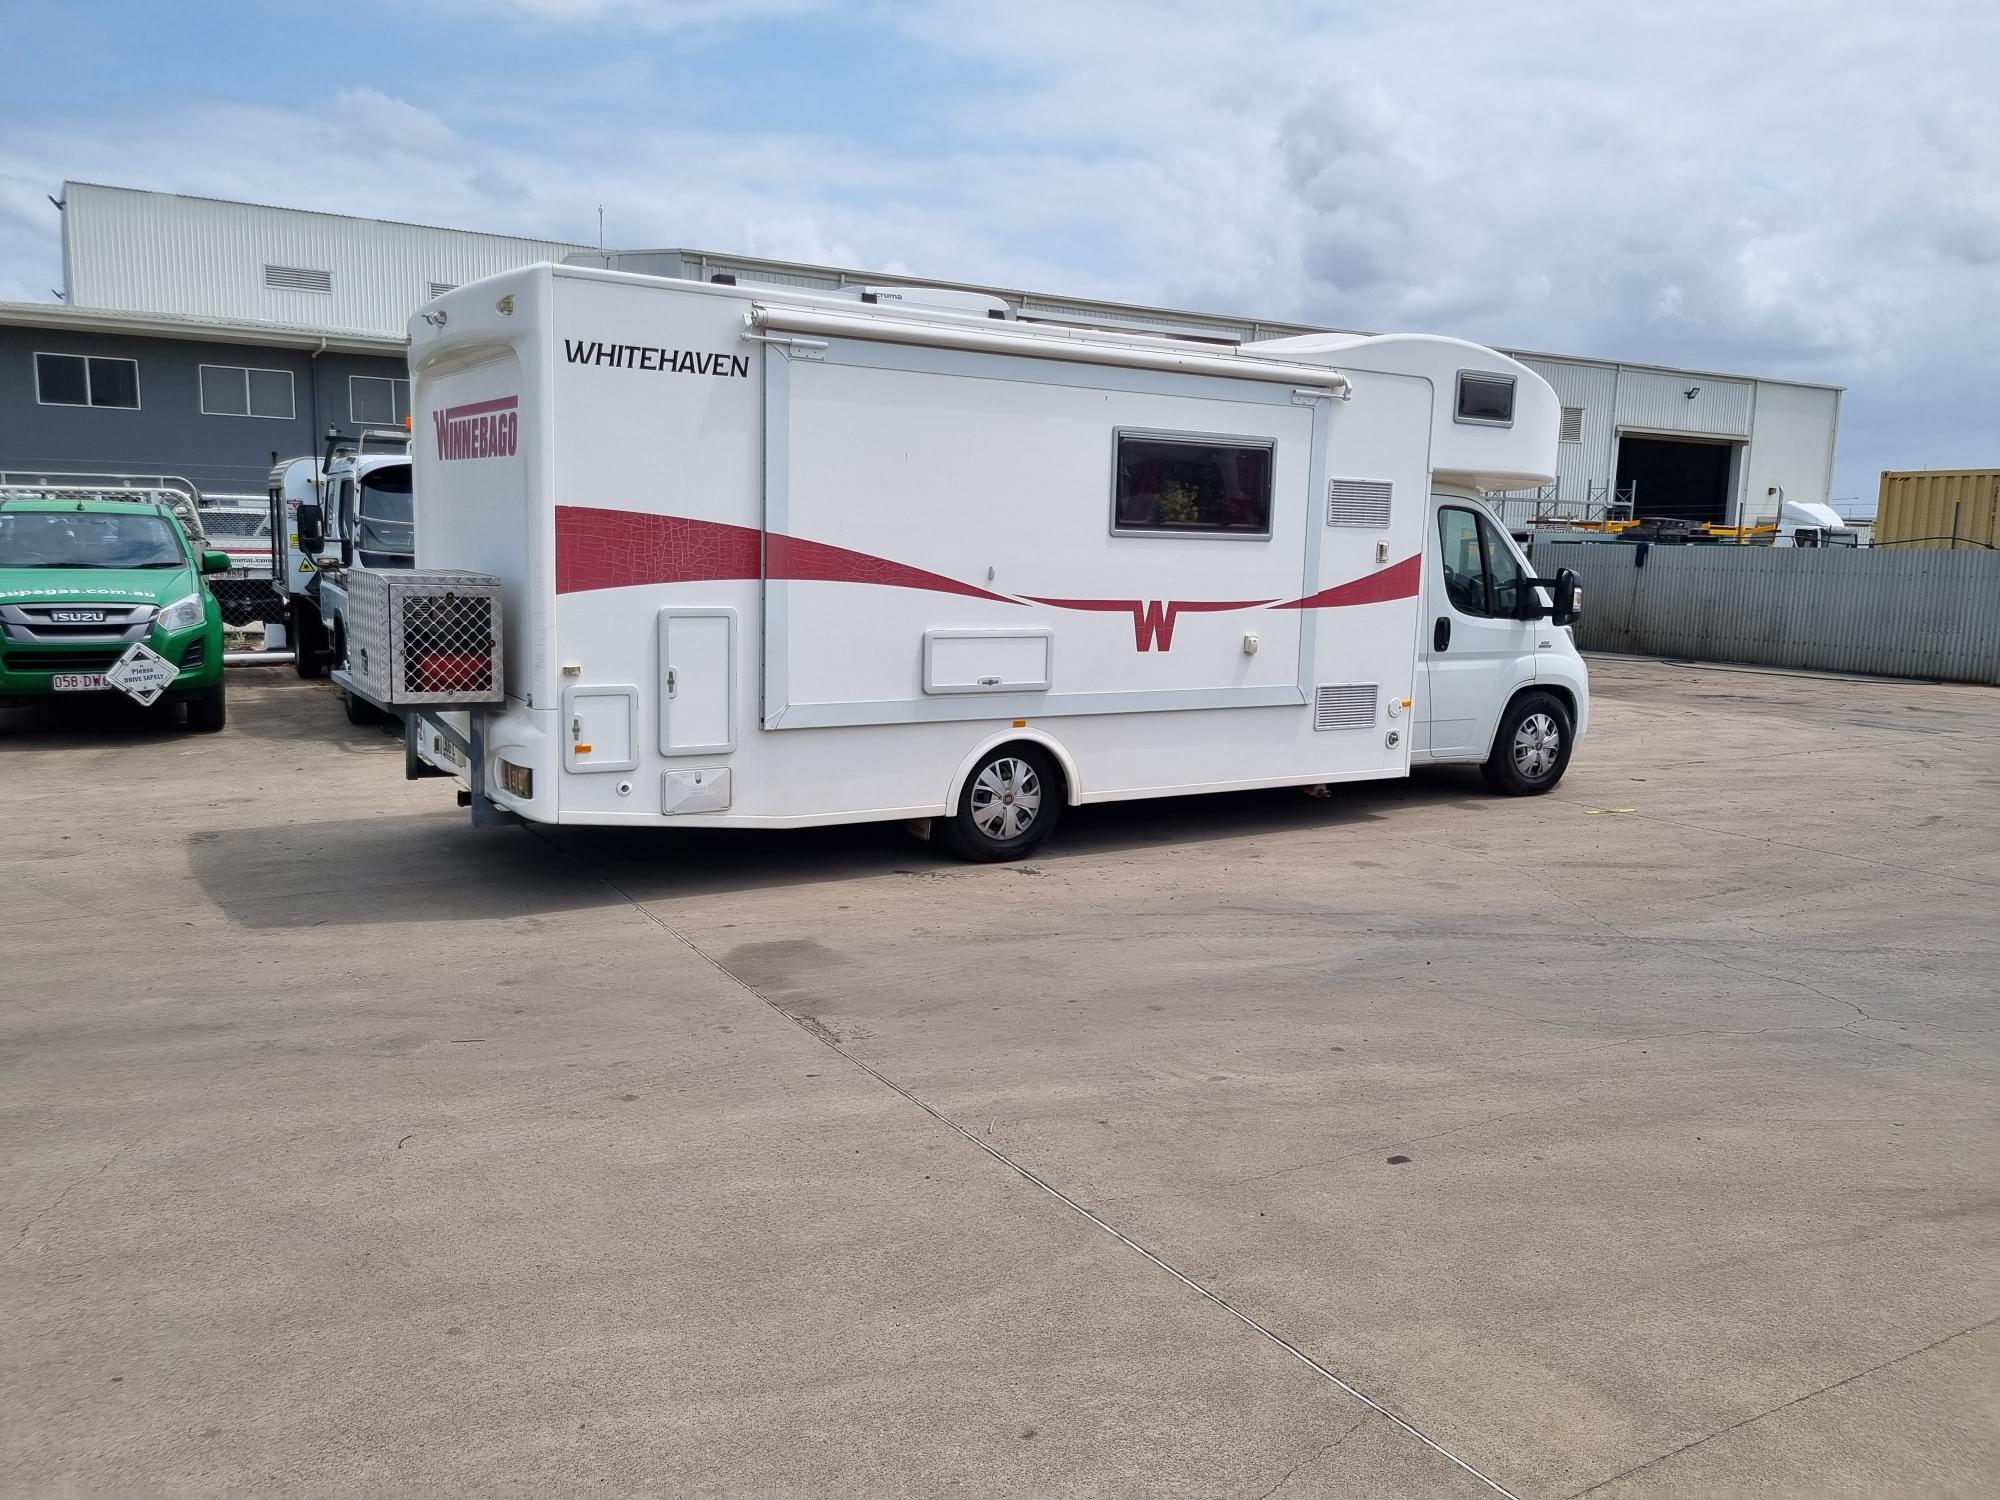 BDS Mechanical Repairs Mackay with a motorhome/campervan parked outside the workshop